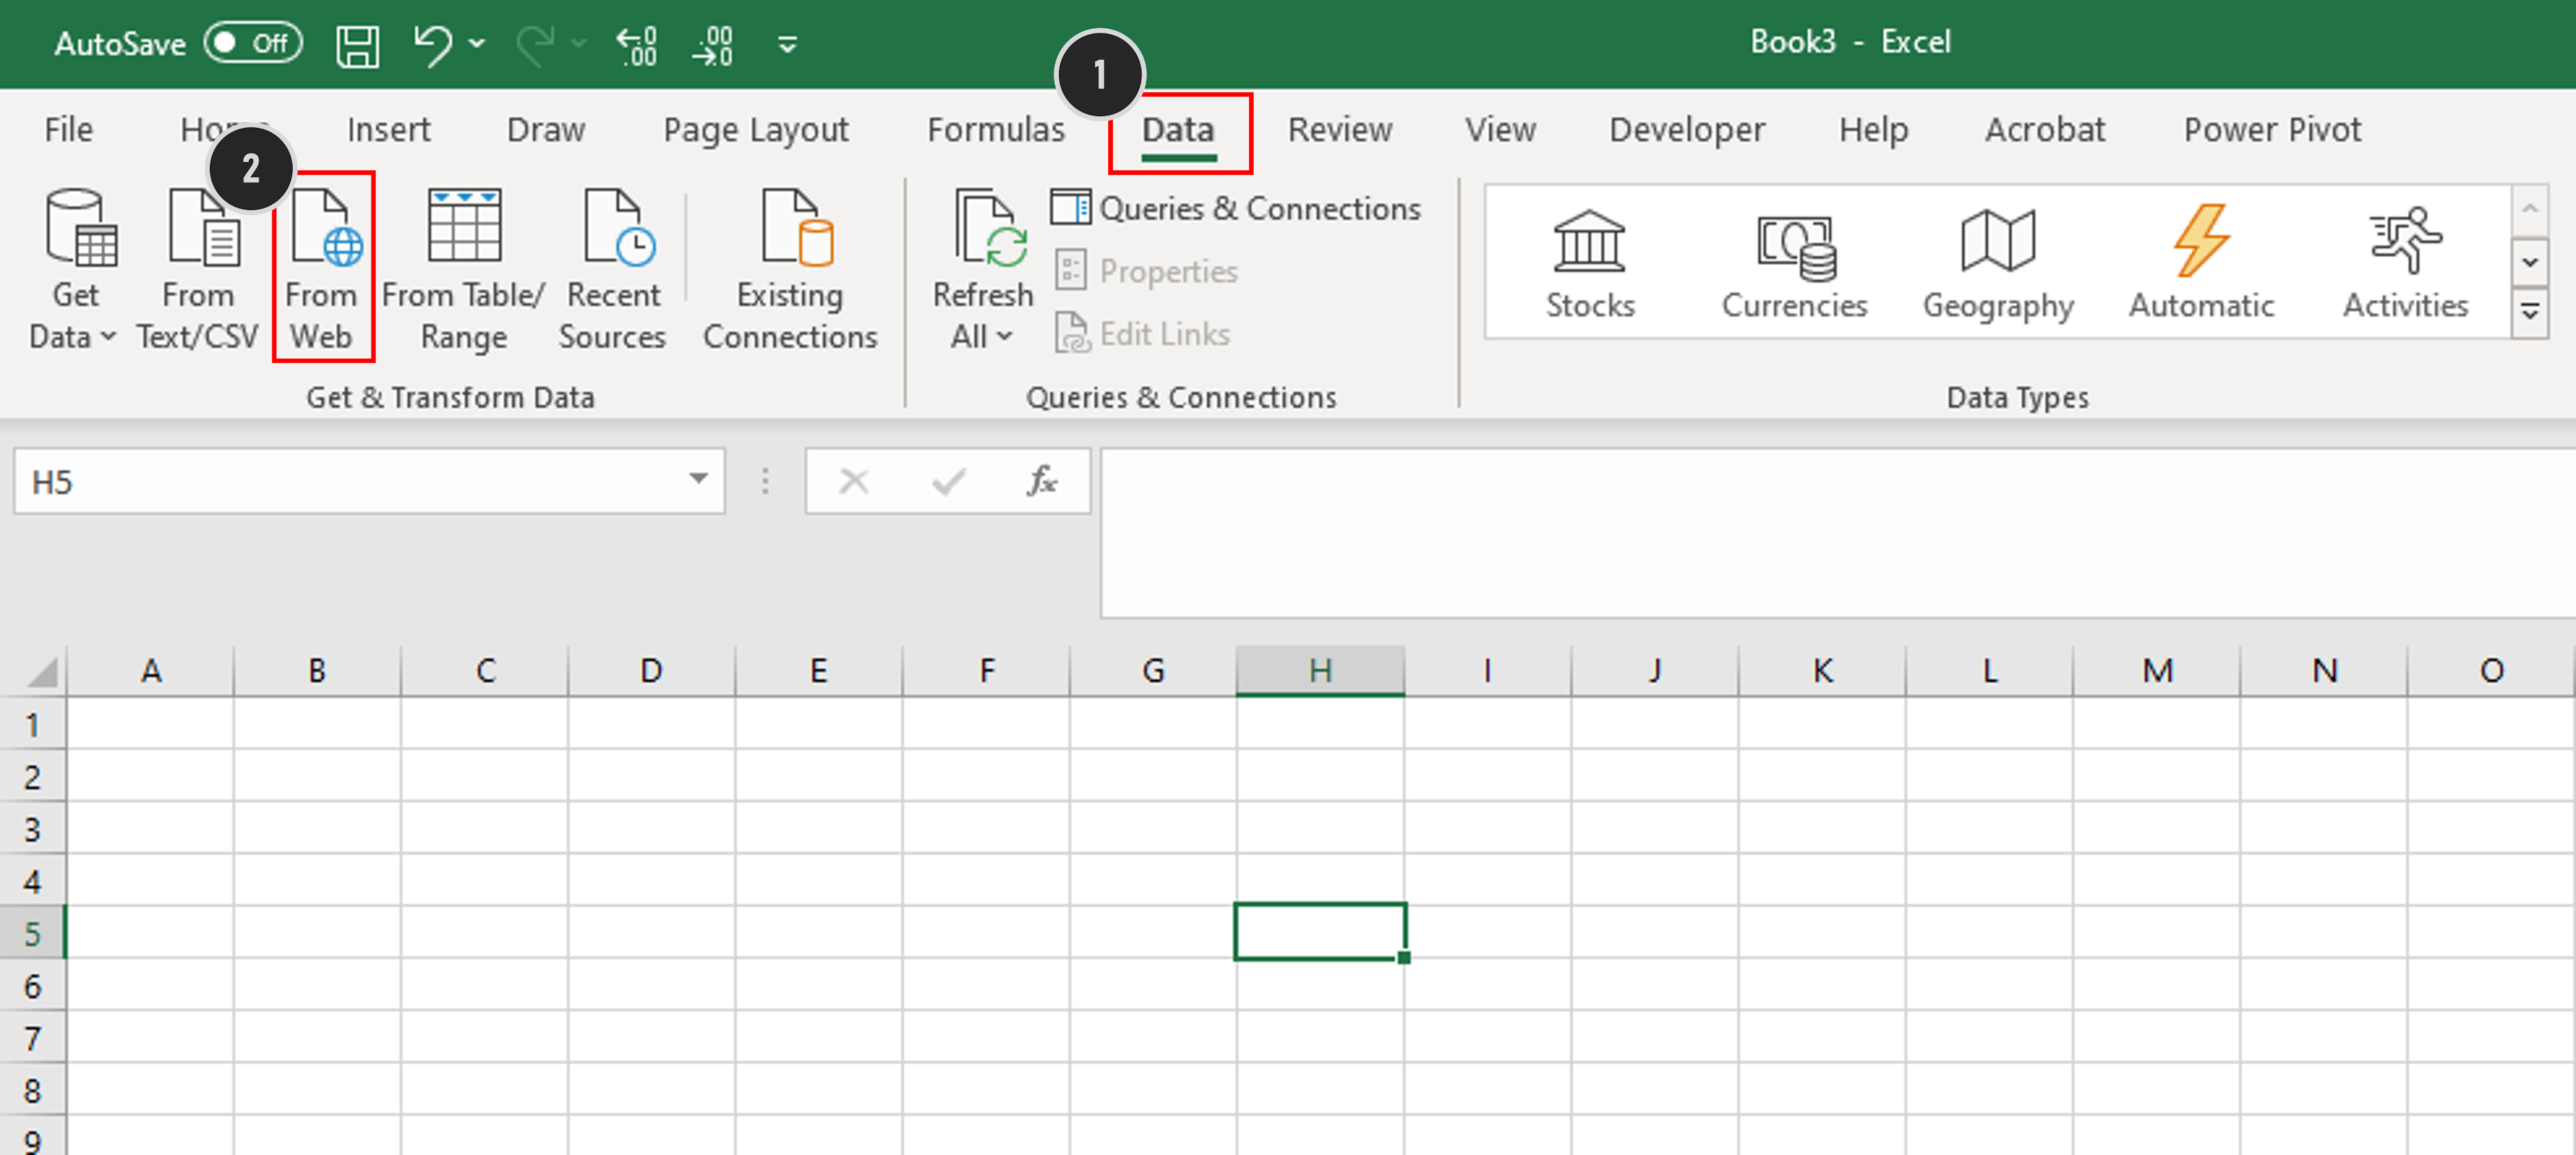 Click "Data > From Web" in a fresh instance of Excel